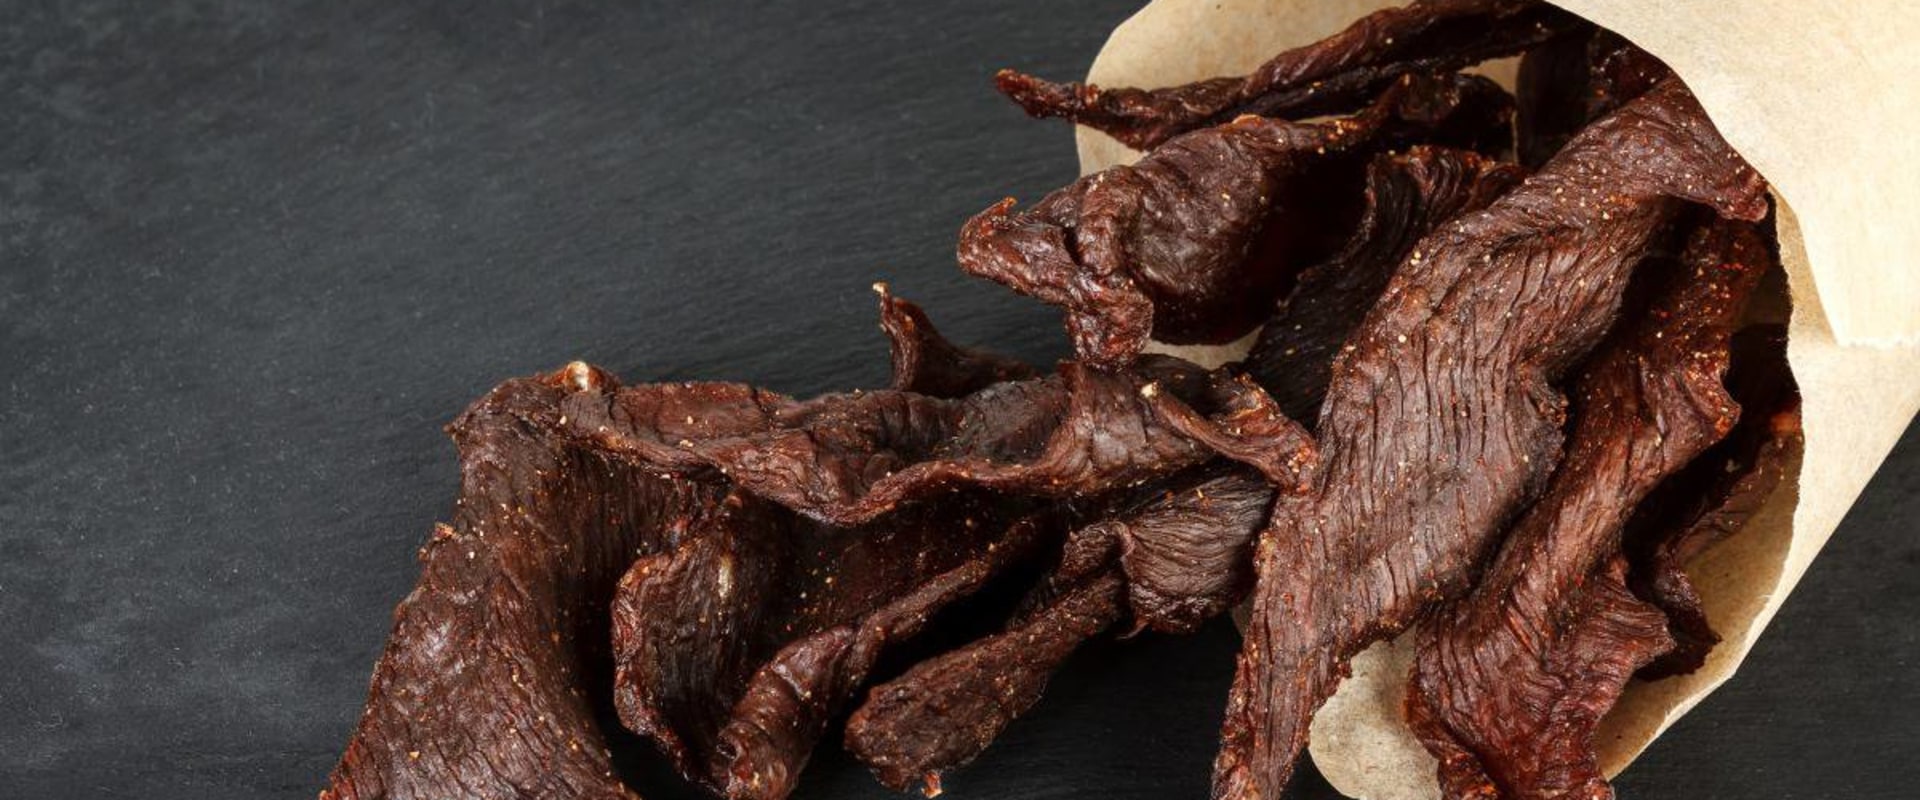 Is jerky good for losing weight?